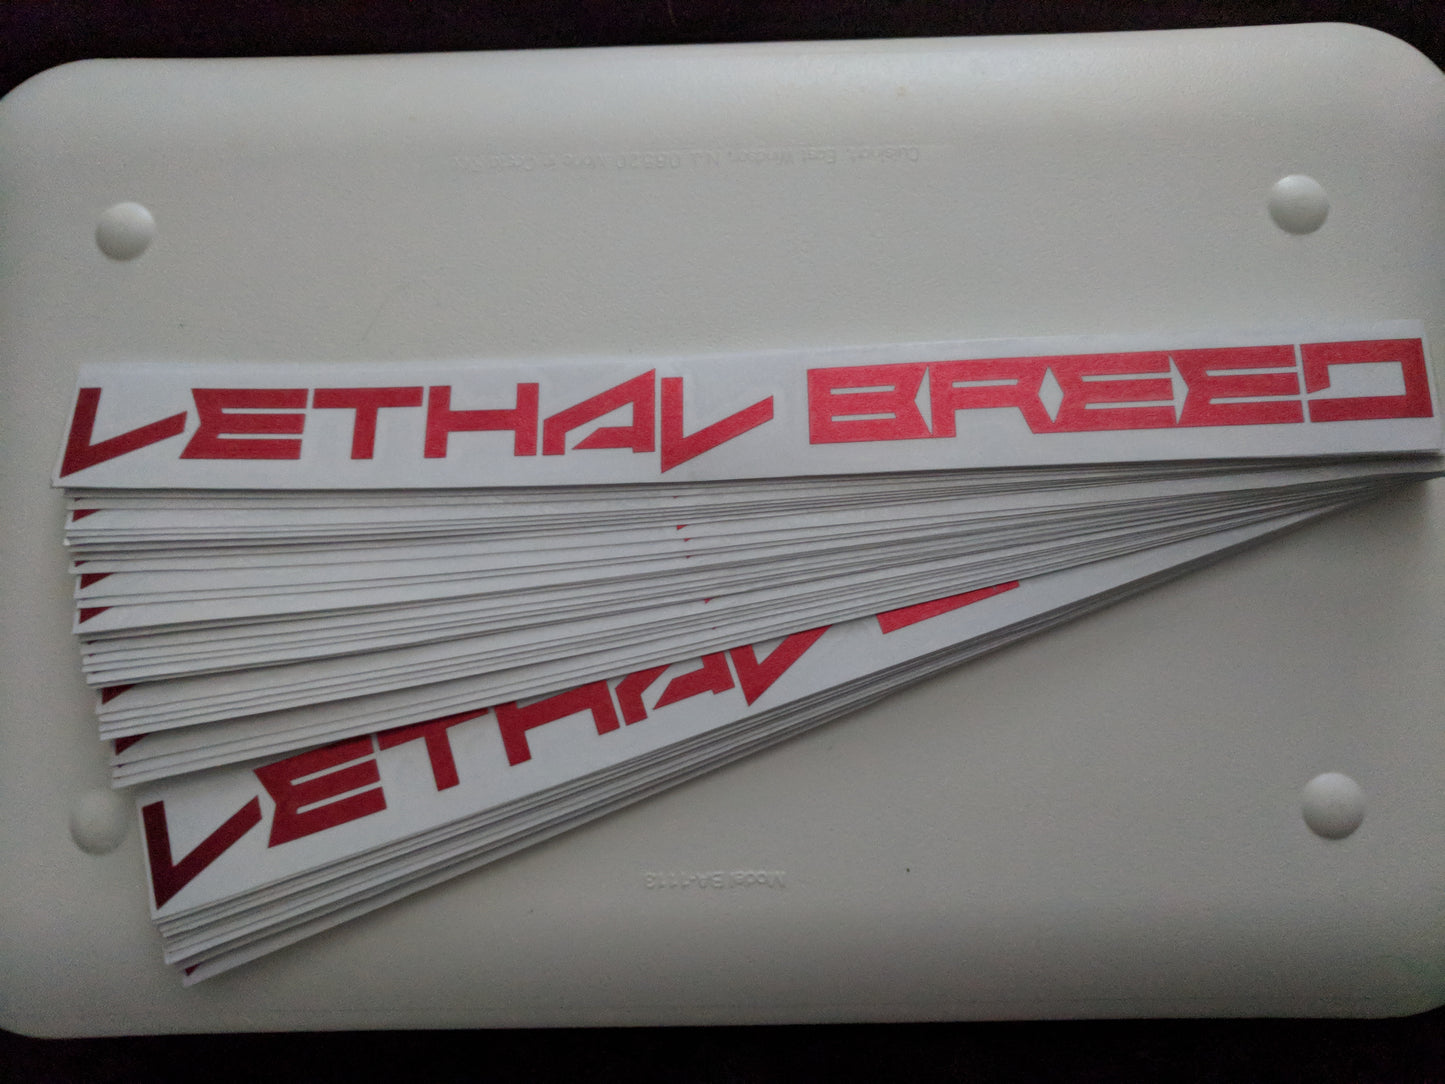 LETHAL BREED METALLIC RED KISS CUT DECAL